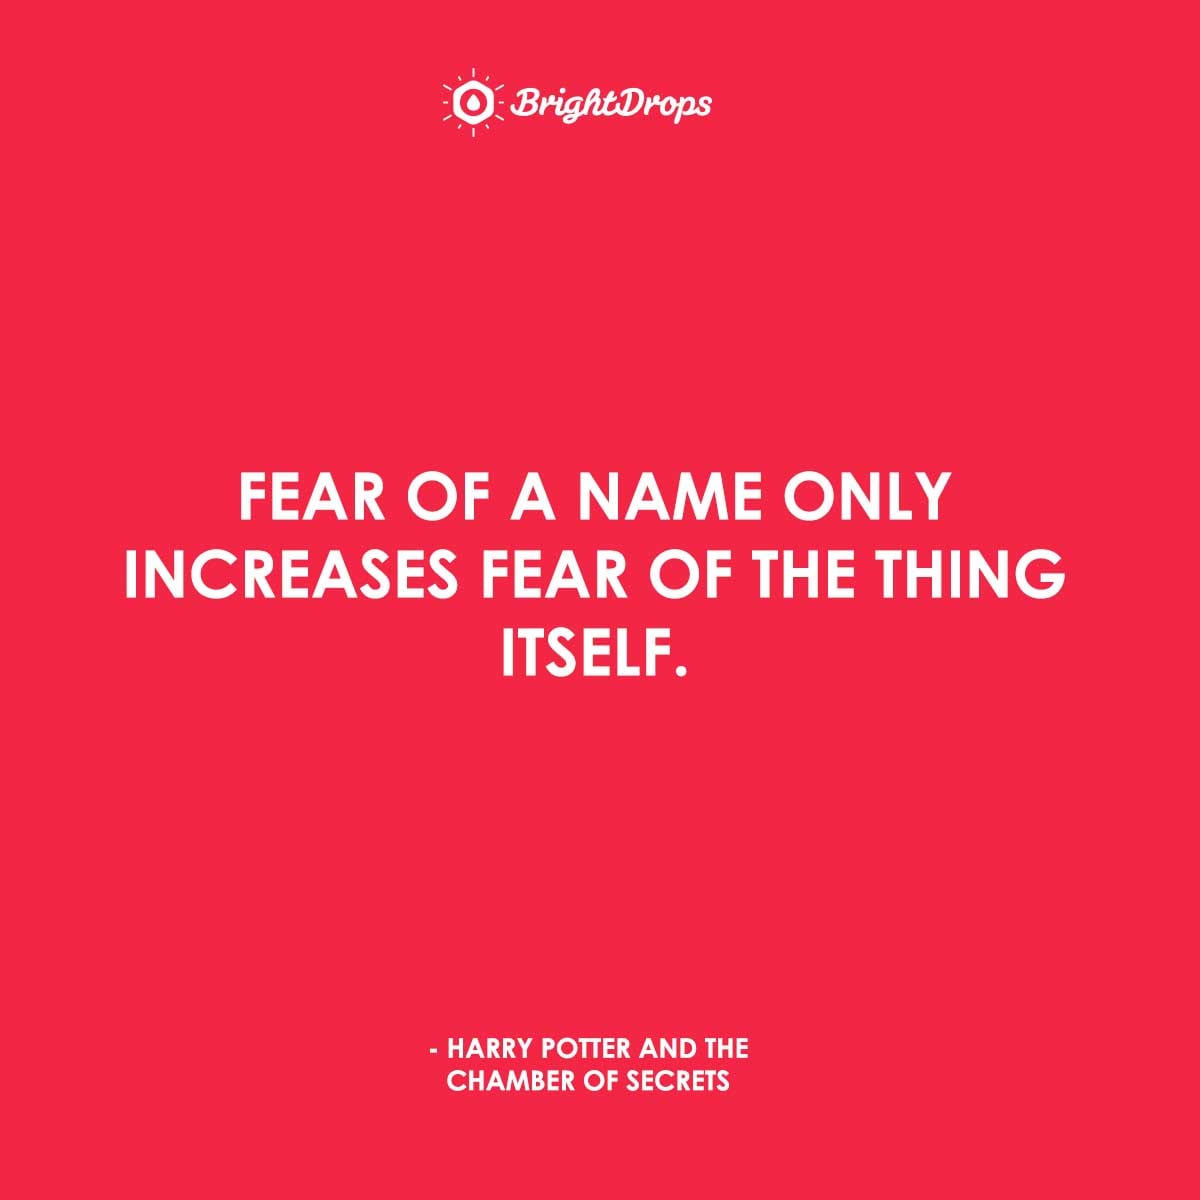 Fear of a name only increases fear of the thing itself. - Harry Potter and the Chamber of Secrets